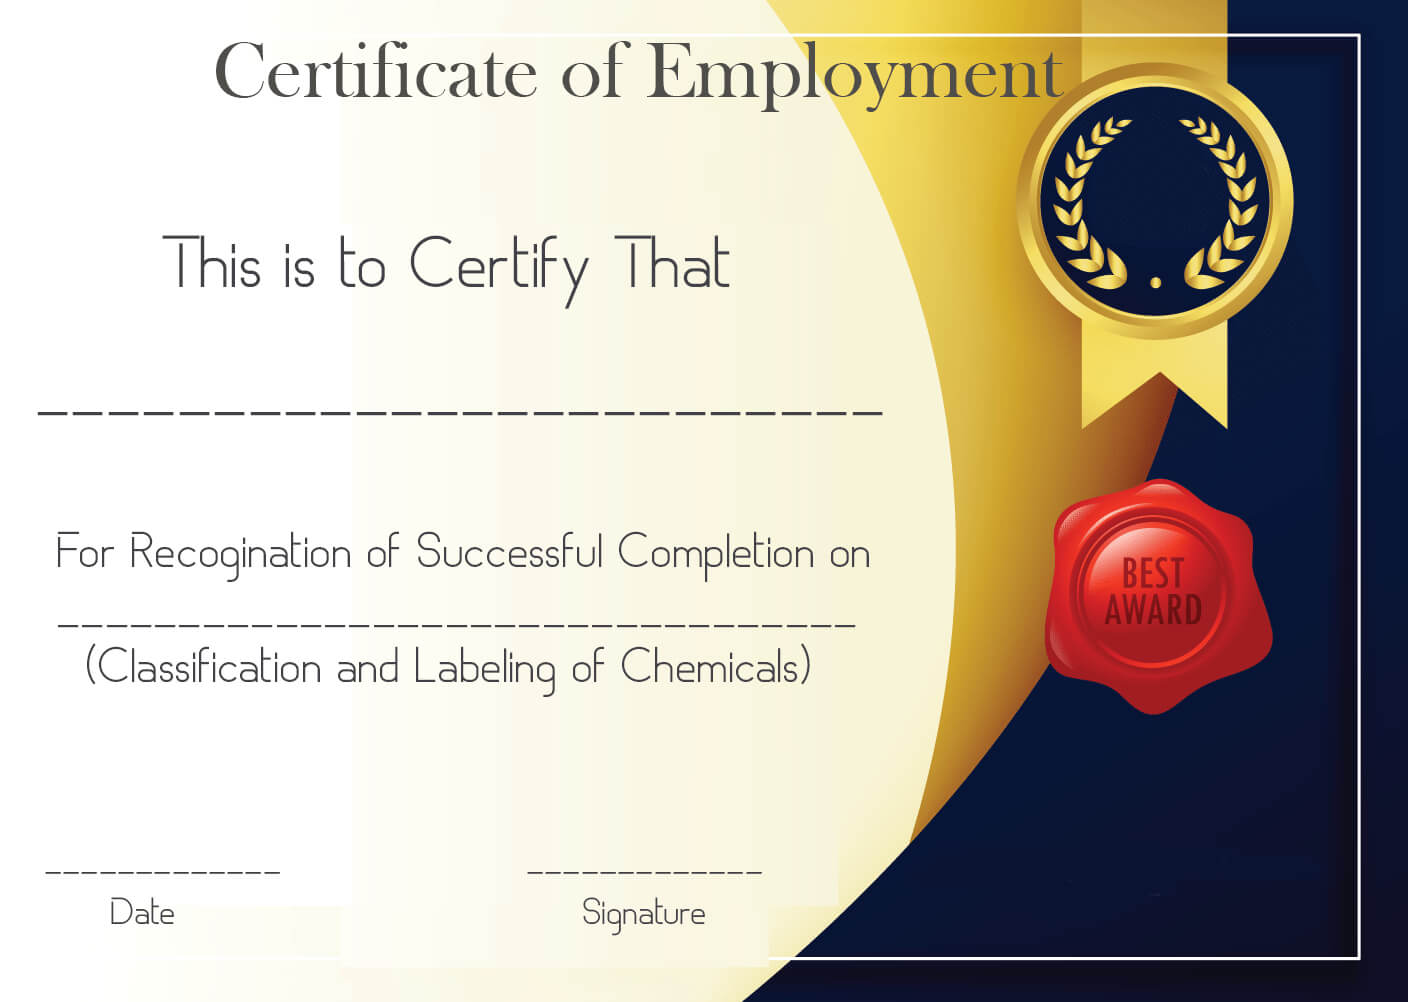 Free Sample Certificate Of Employment Template | Certificate Regarding Sample Certificate Employment Template